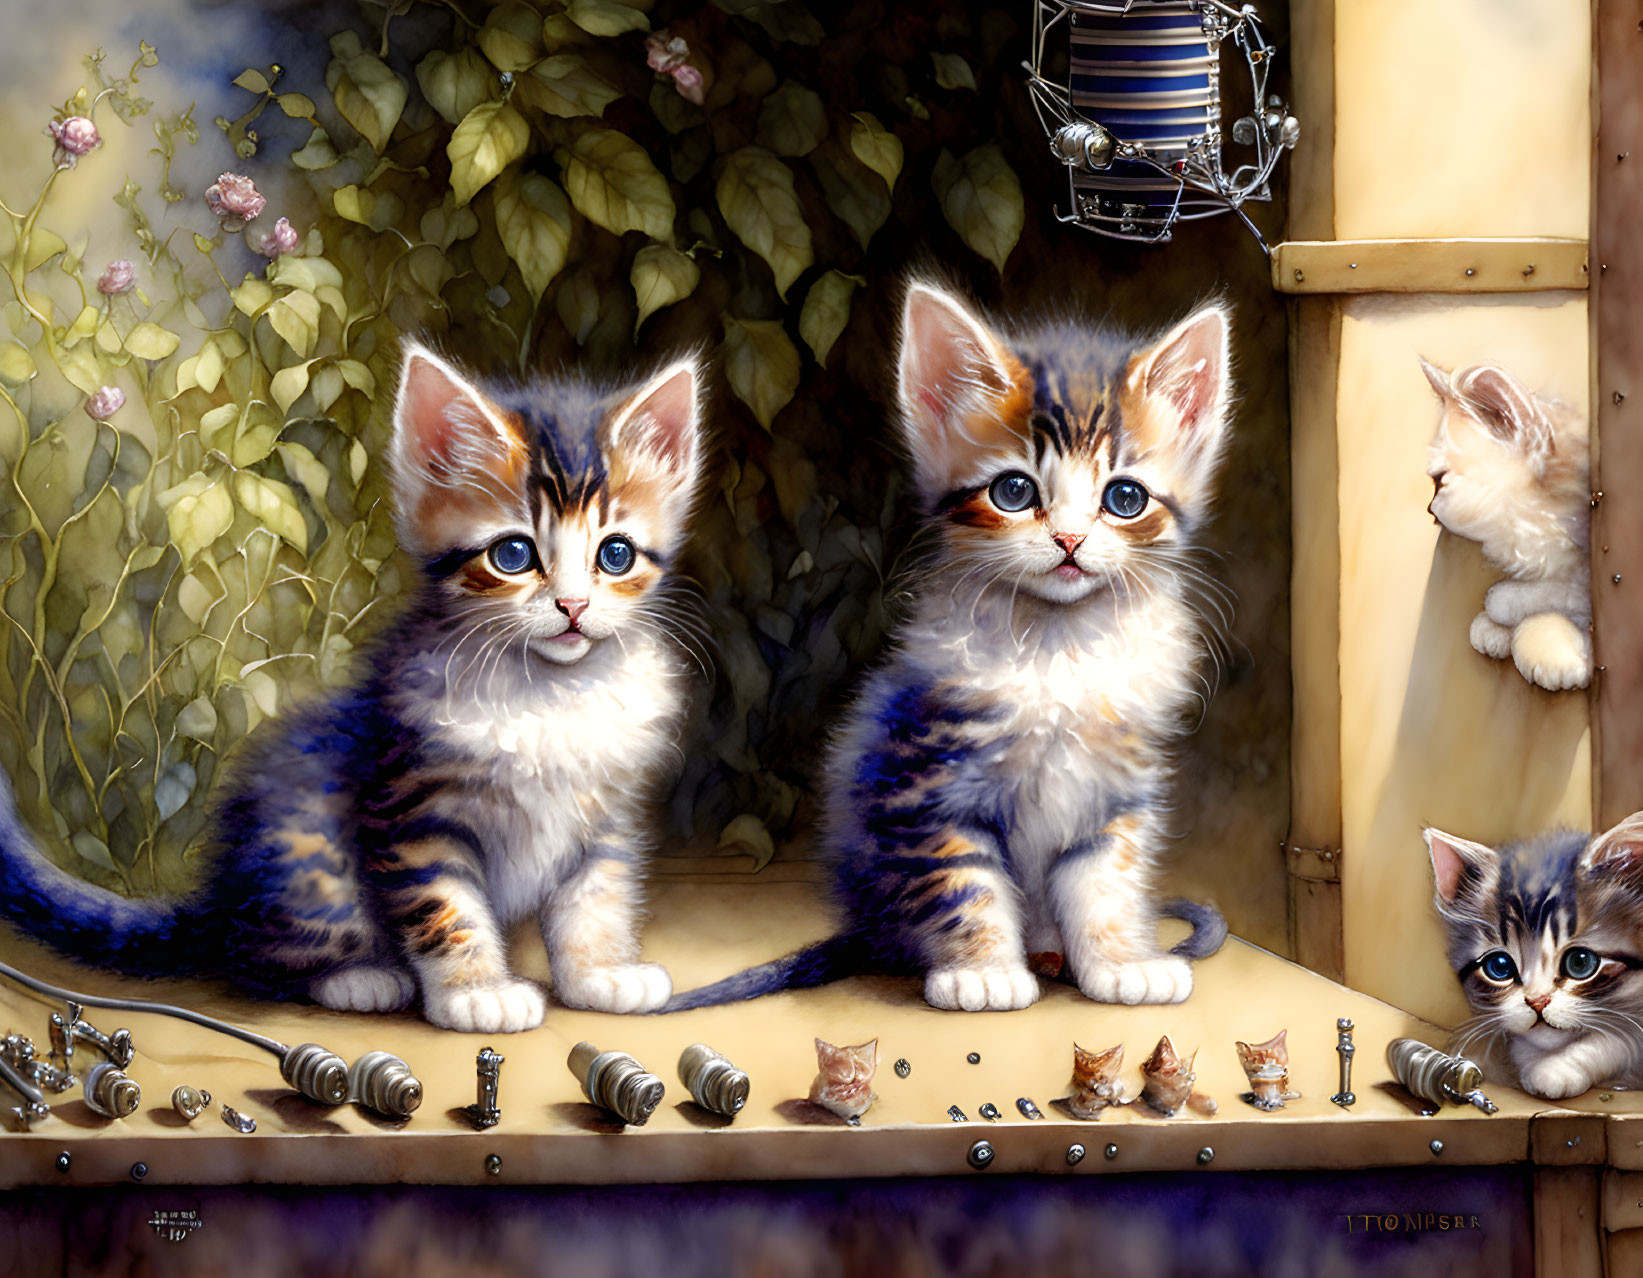 Three Striped Fur Kittens Playing Among Chess Pieces and Blooming Plant